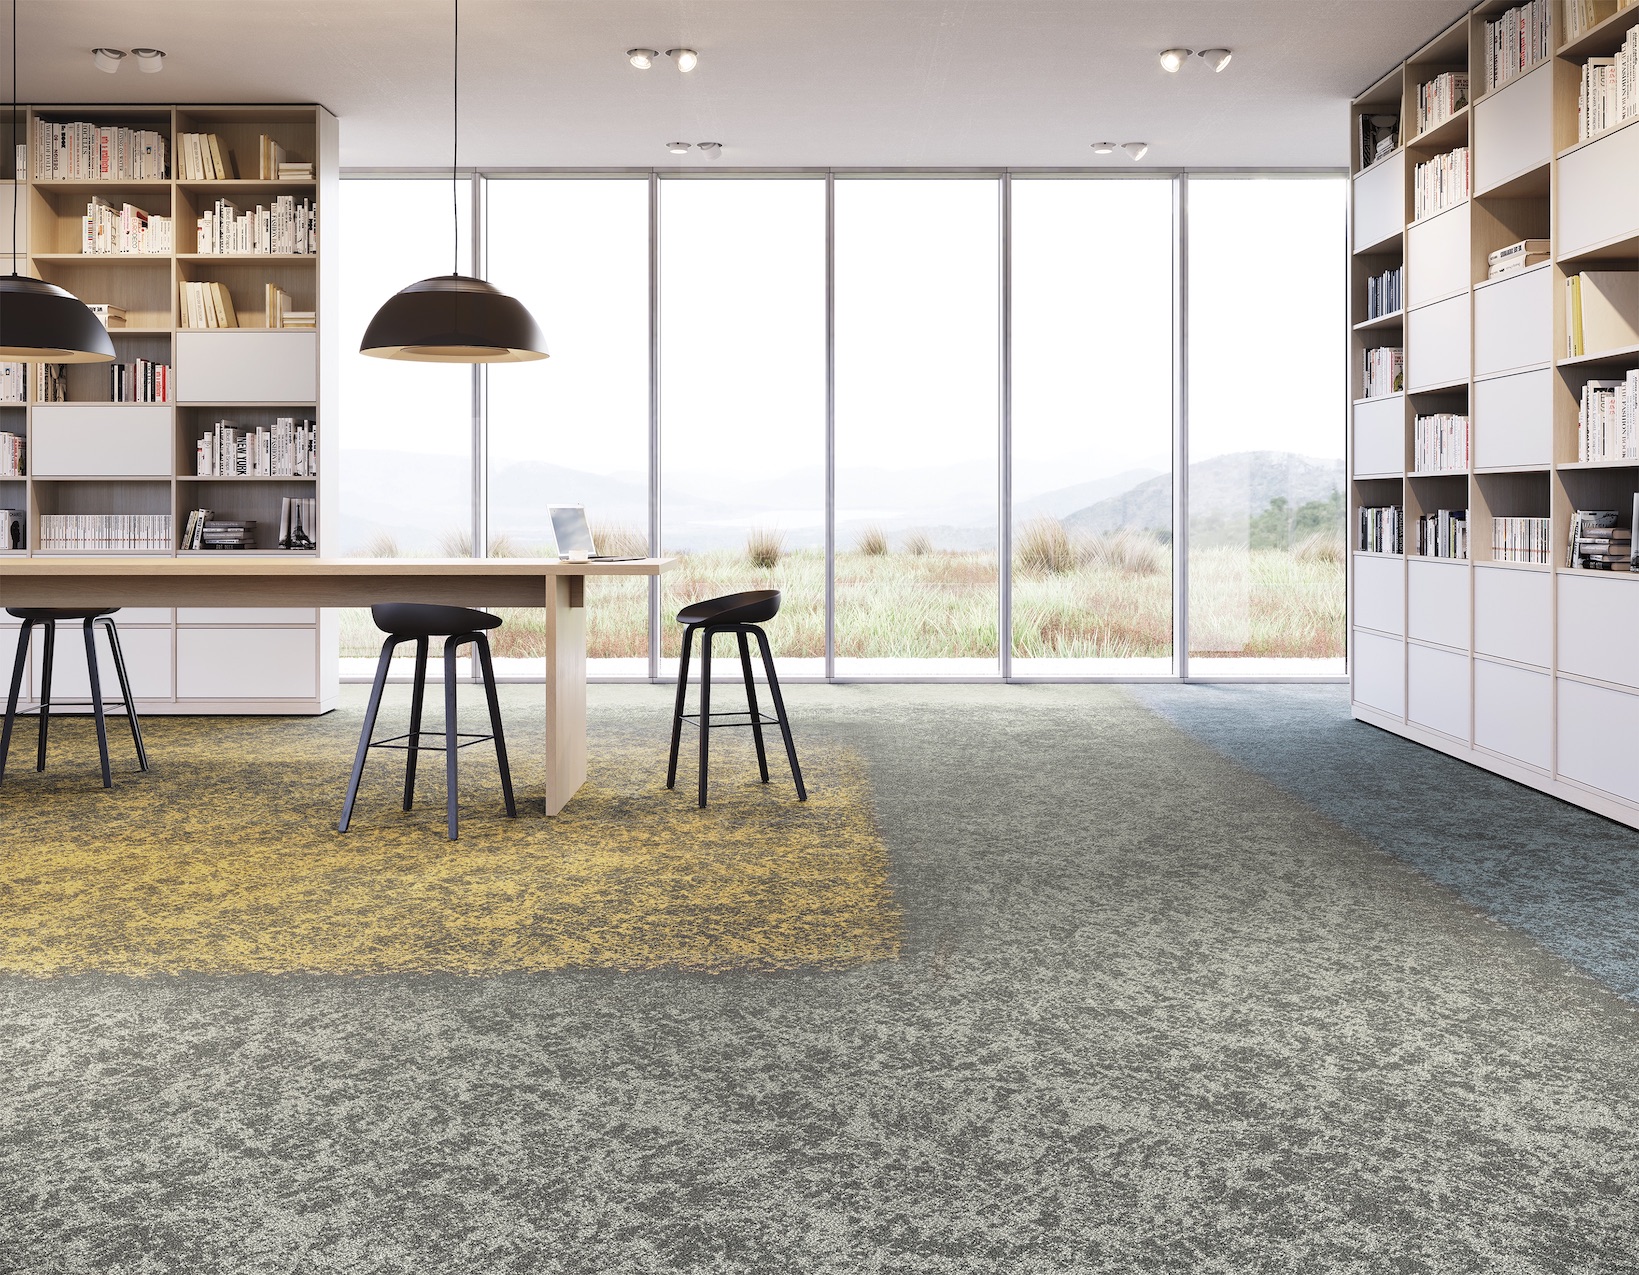 Shaw Contract unveils new LVT line, Rugs program - Floor Covering News